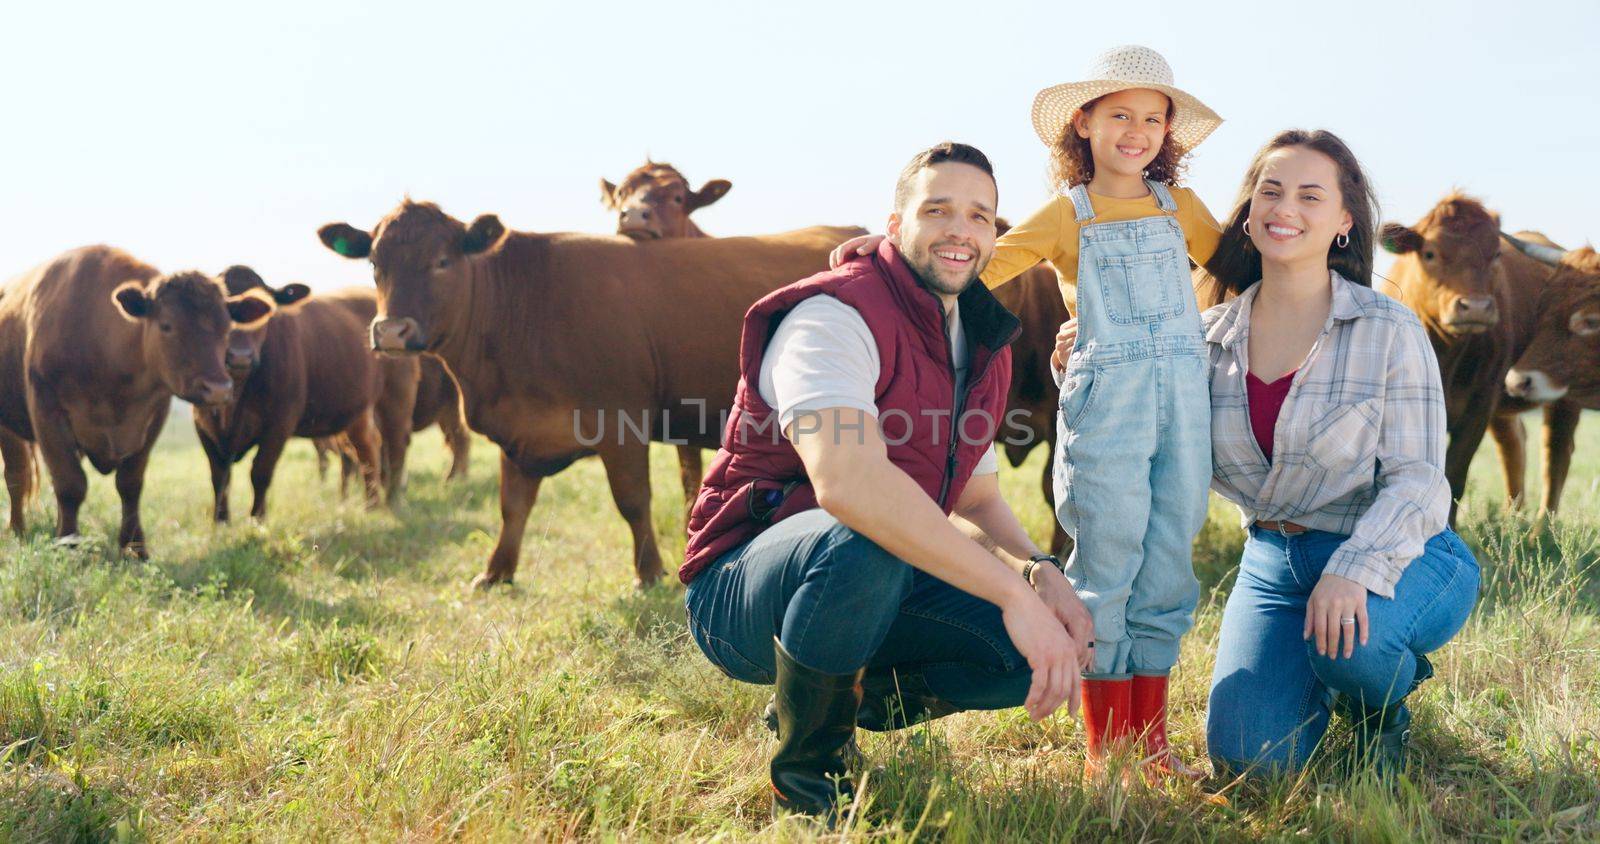 Farm, portrait and family bonding in nature, looking at animals and learning about livestock. Farming, agriculture and farmer parents bonding with girl on sustainable cattle business, relax and happy.